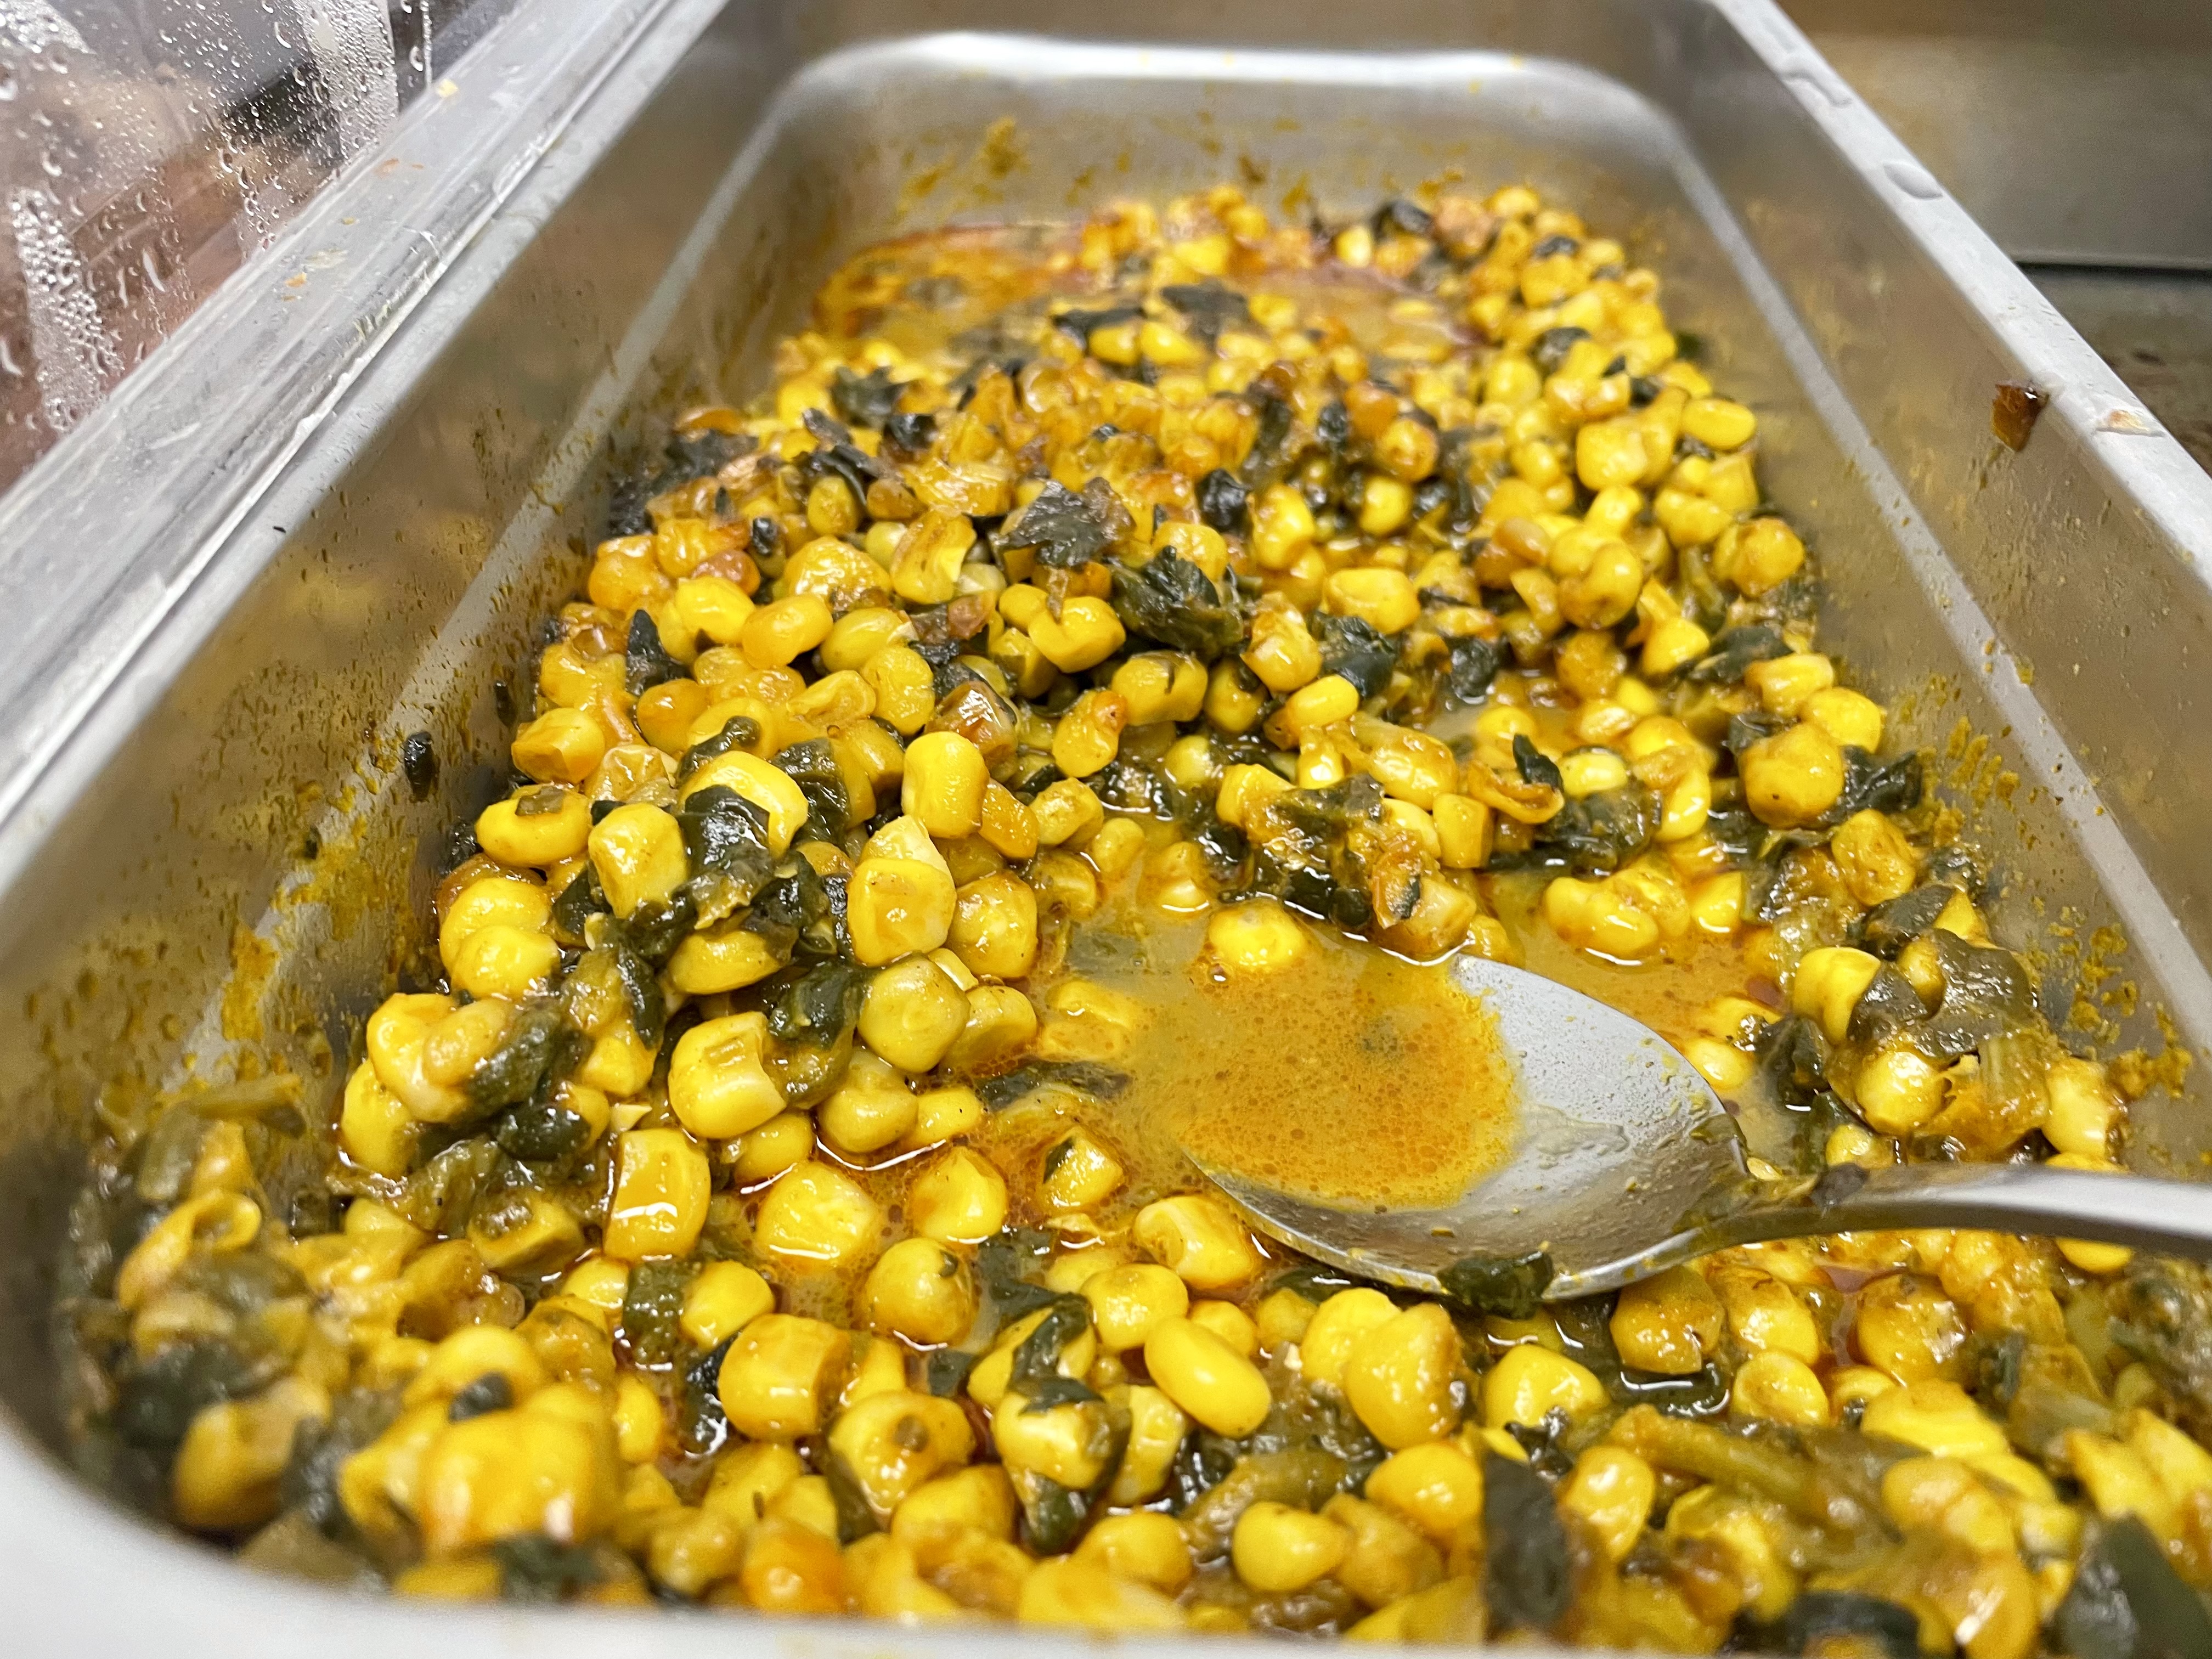 Pictured above is sangah, a popular Cameroonian dish made with corn, cassava leaf, and palm nut juice